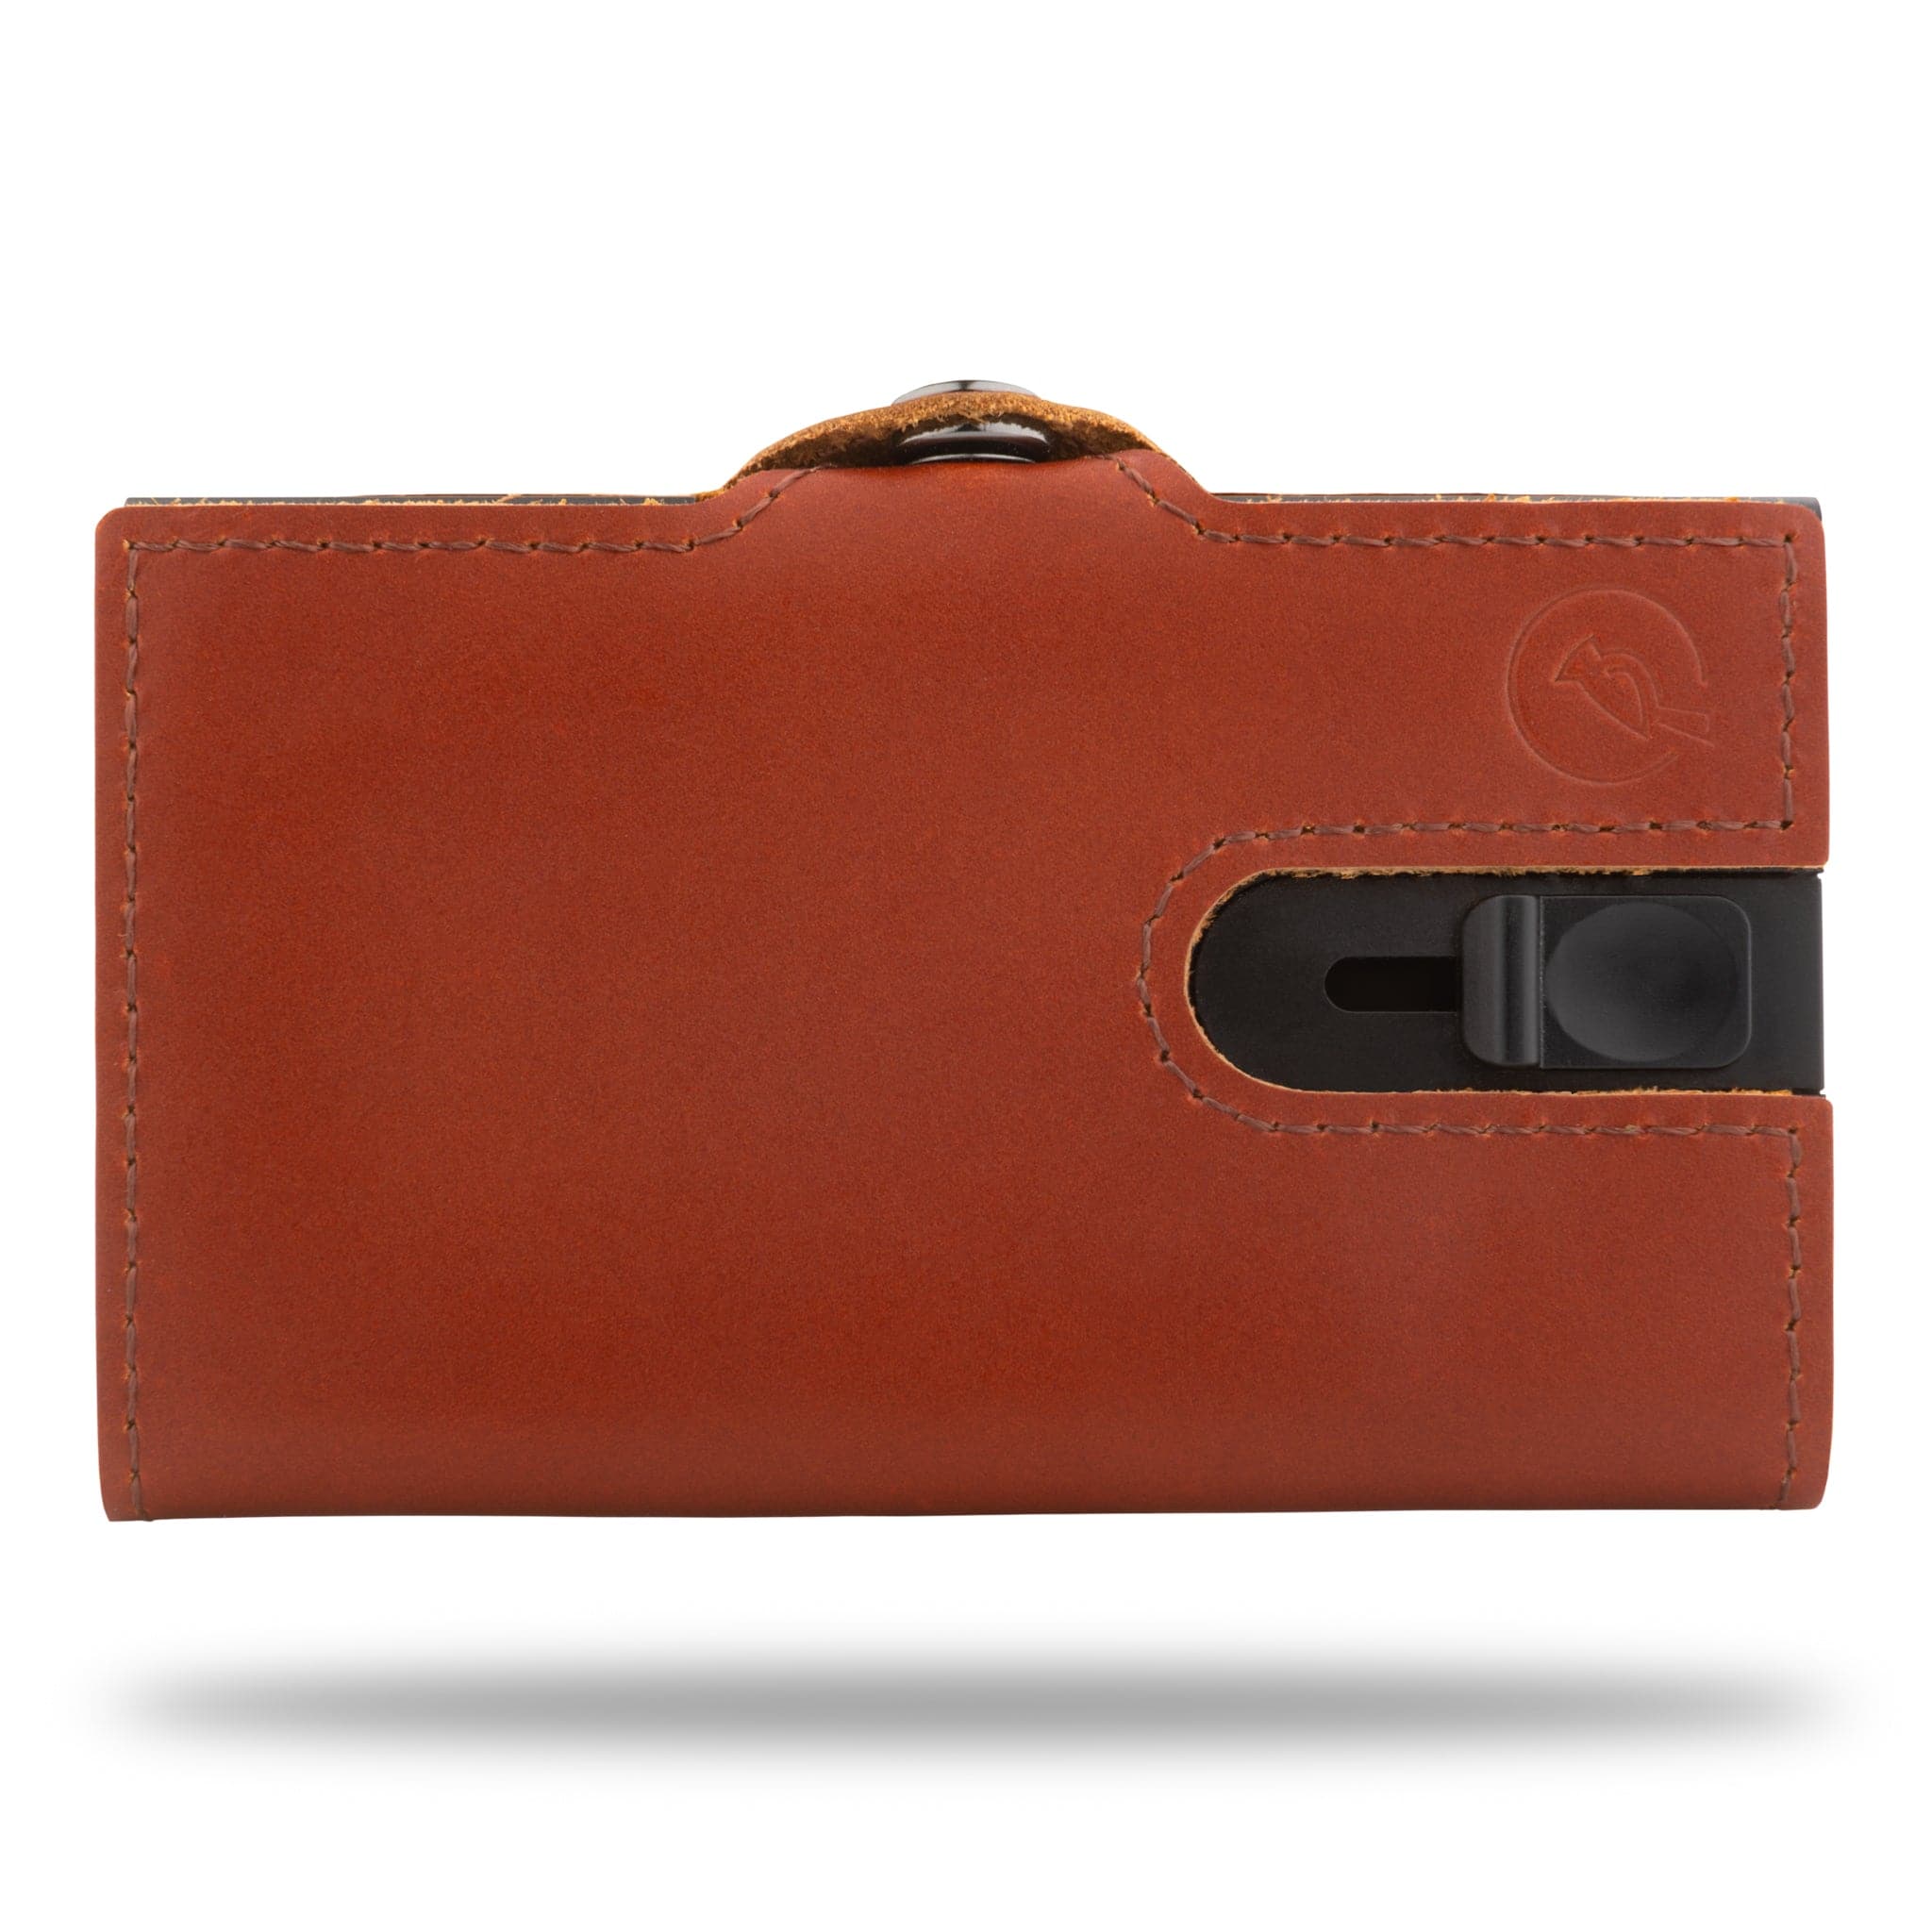 Cardinal Brown leather wallet